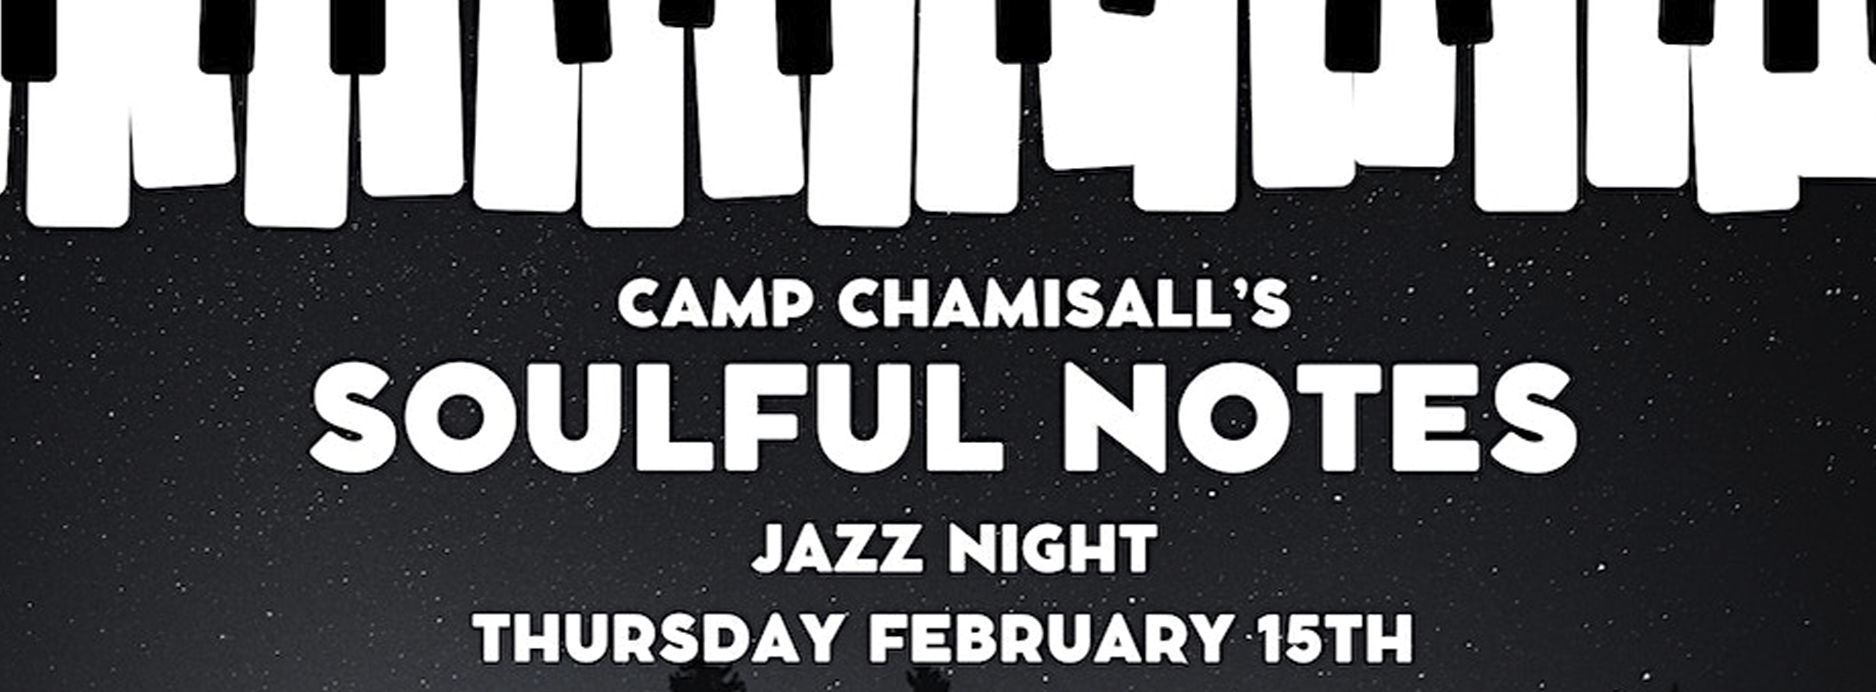 Camp Chamisall's Soulful Notes Jazz Night